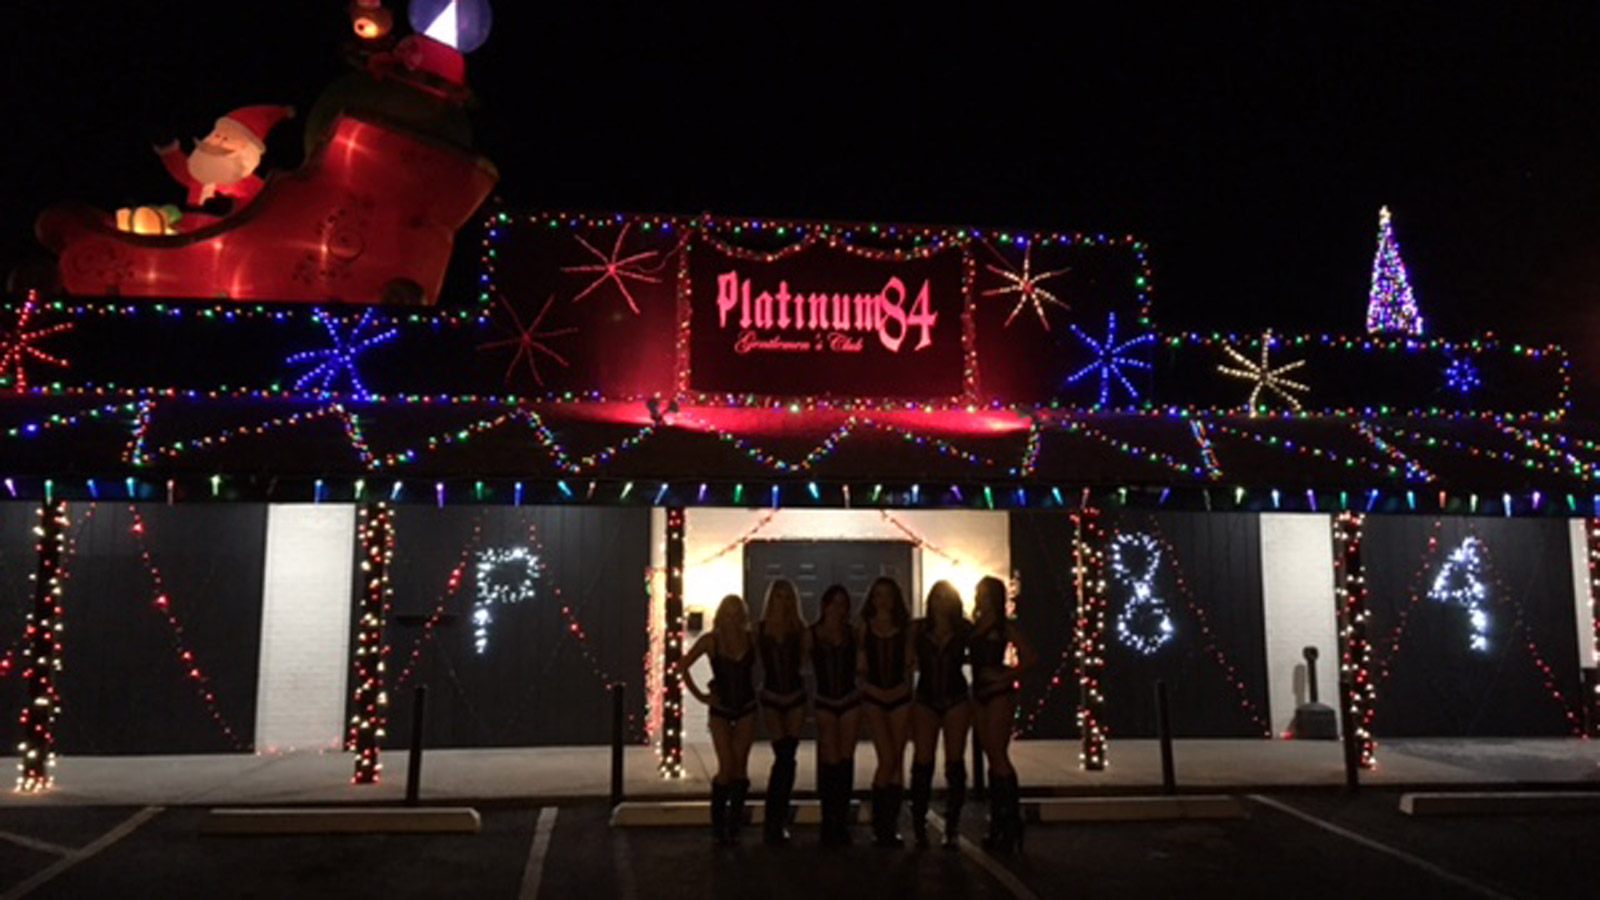 Only In Federal Heights: Strip Club Wins City Holiday Lights Contest.